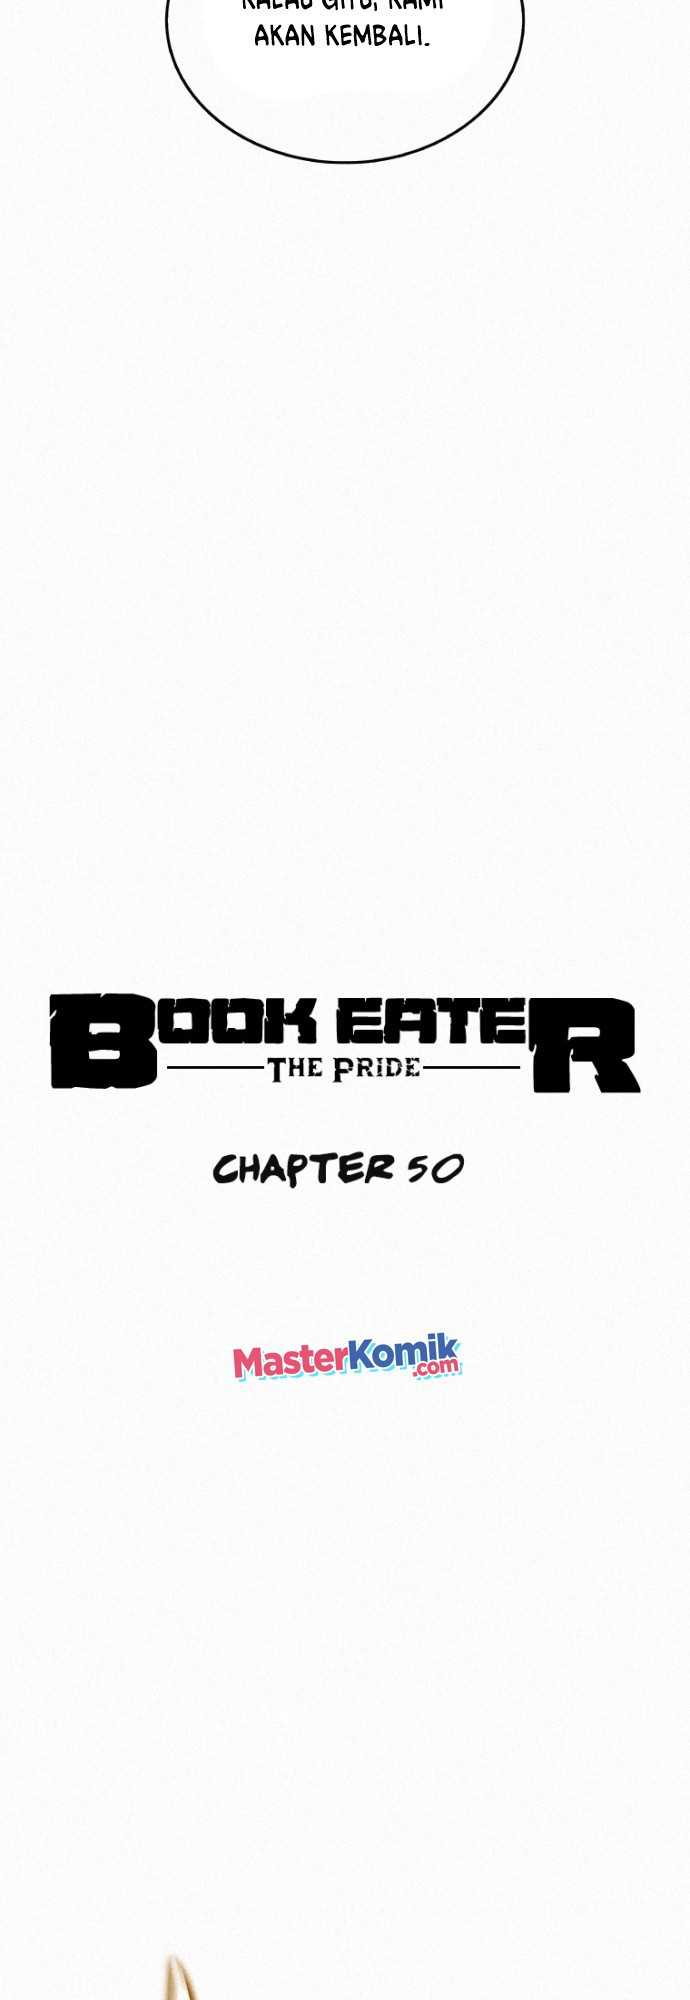 The Book Eating Magician (Book Eater) Chapter 50